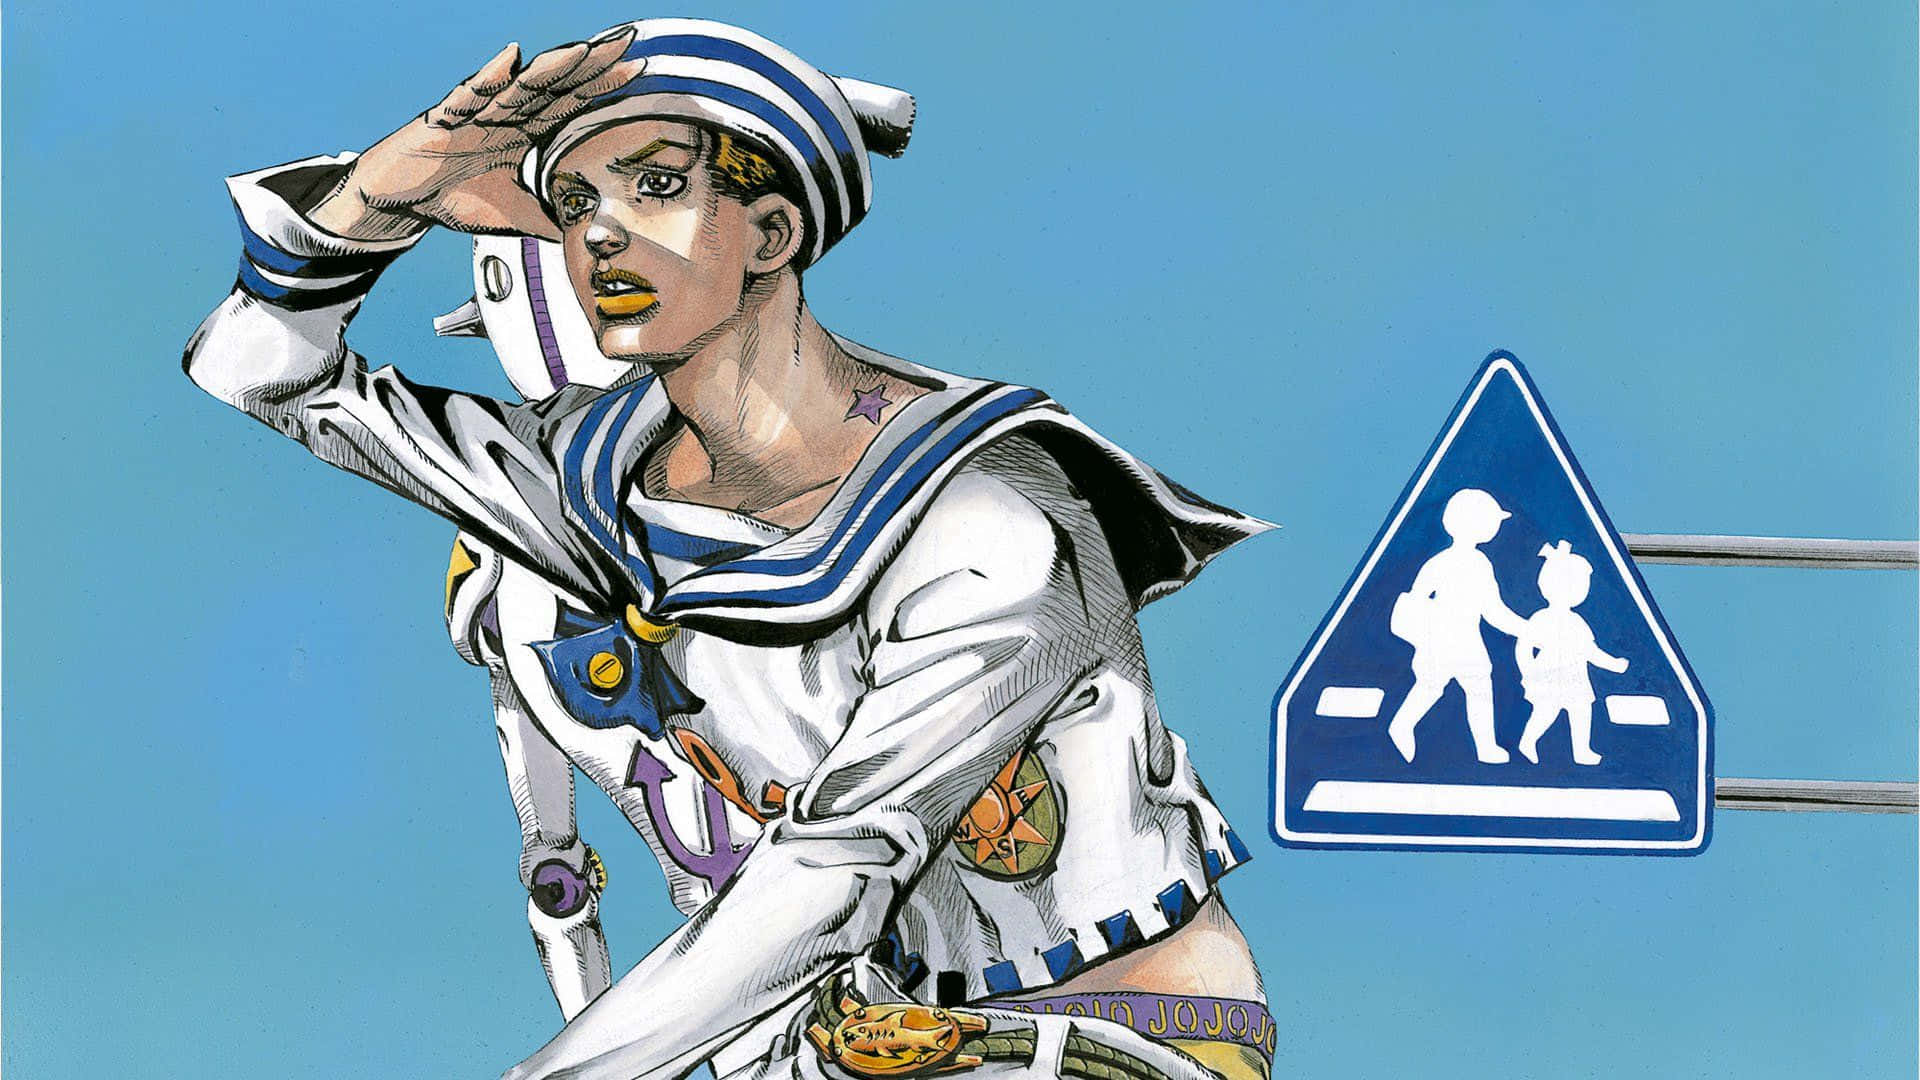 Jojolion - The Mysterious Tale of a Thrilling Adventure Wallpaper